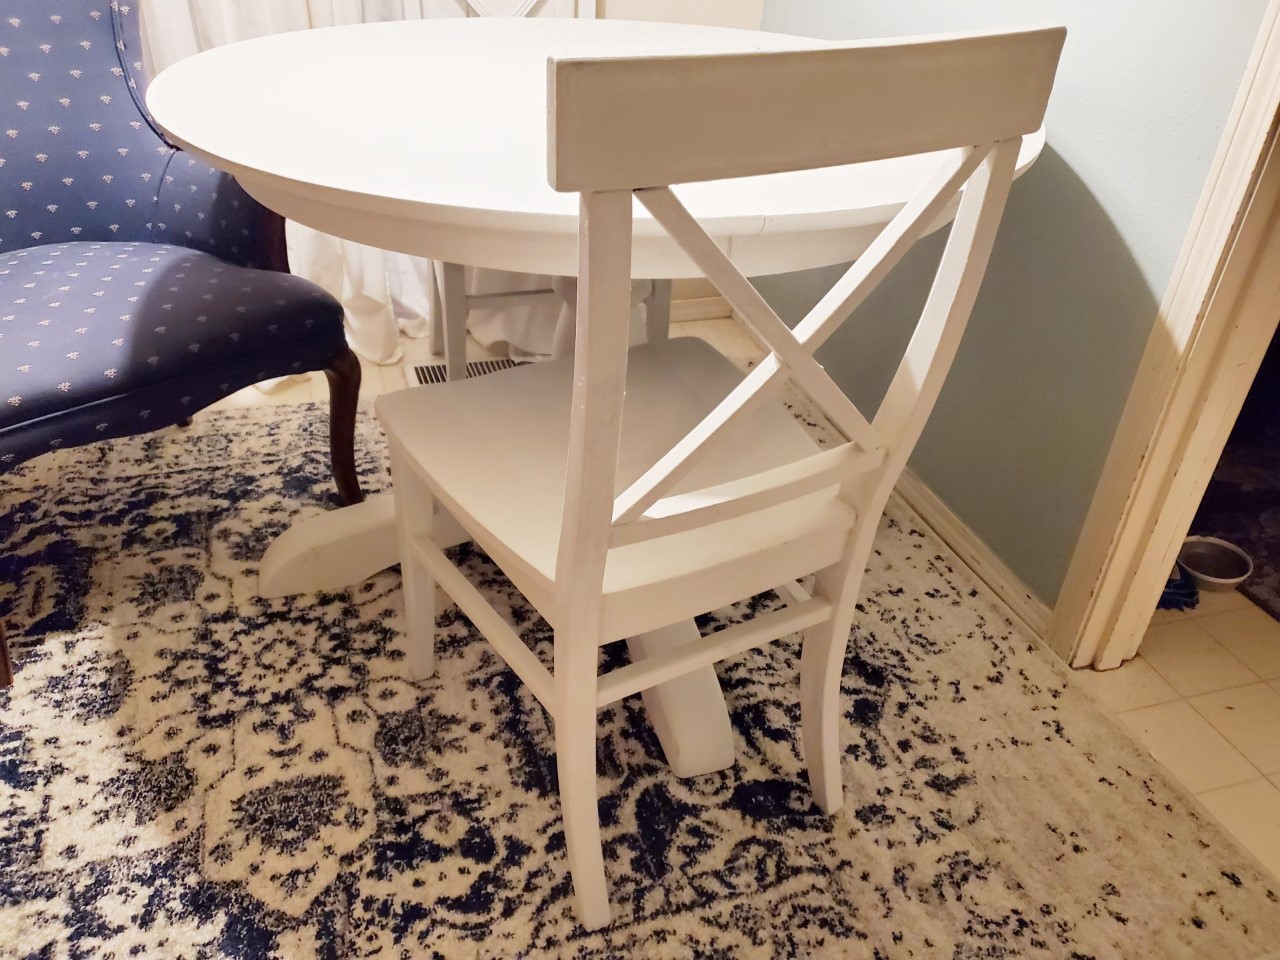 How to Makeover a Pottery Barn Table and chairs.